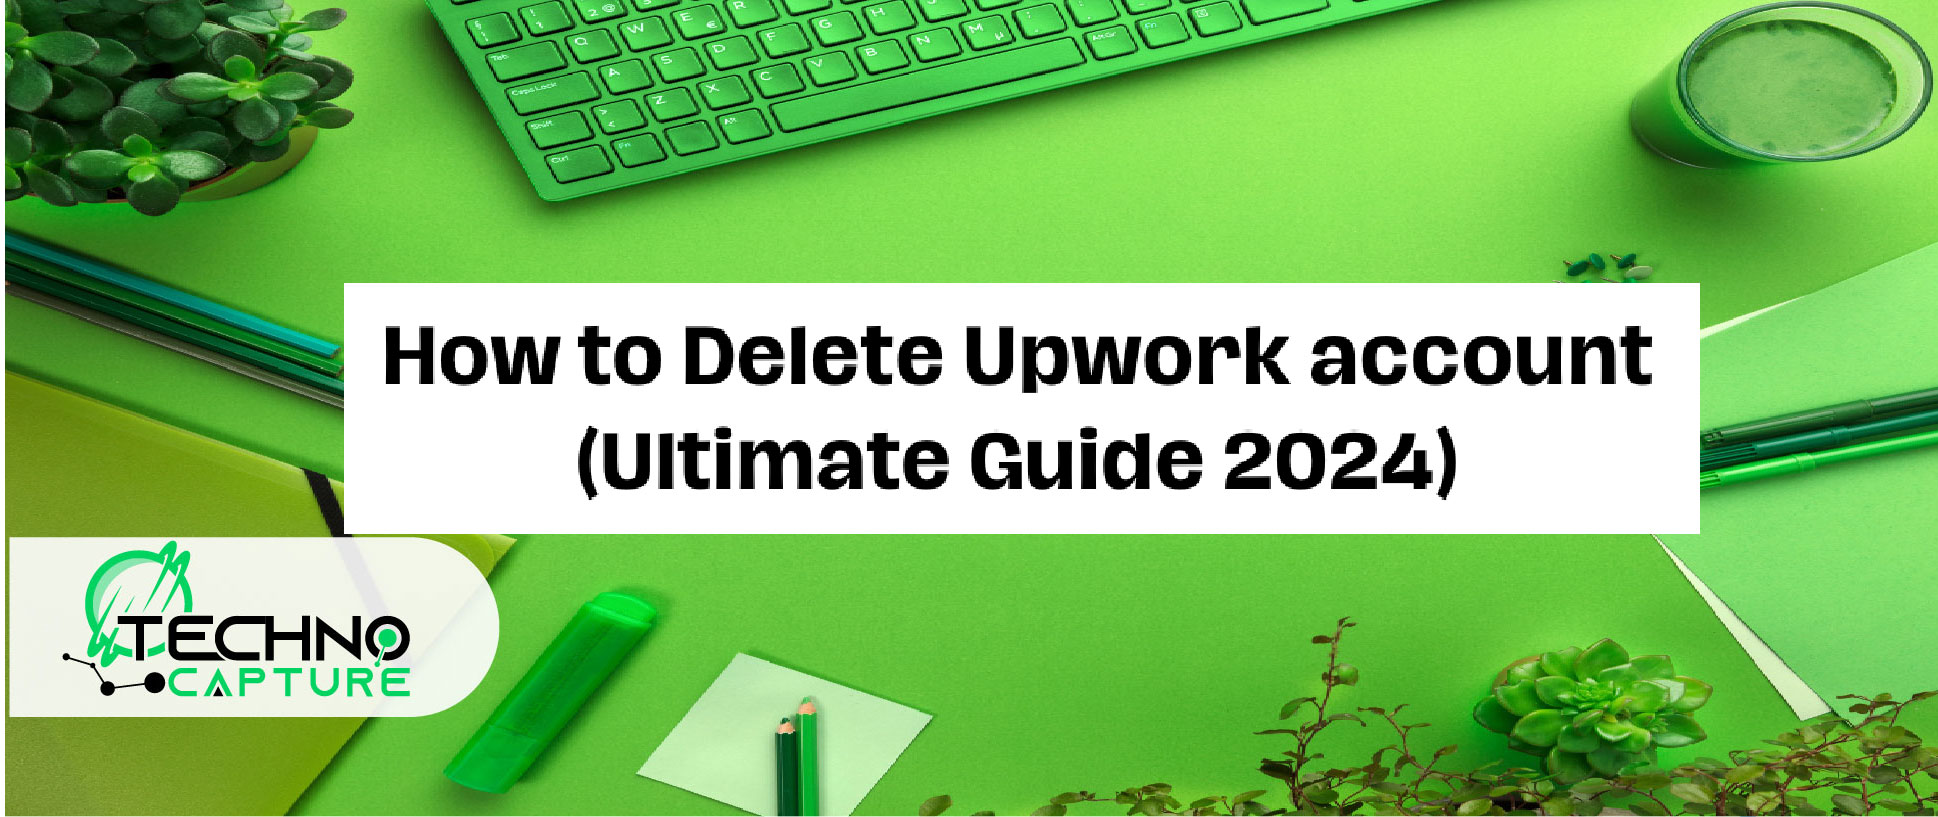 How to Delete Upwork Account (Ultimate Guide 2024)